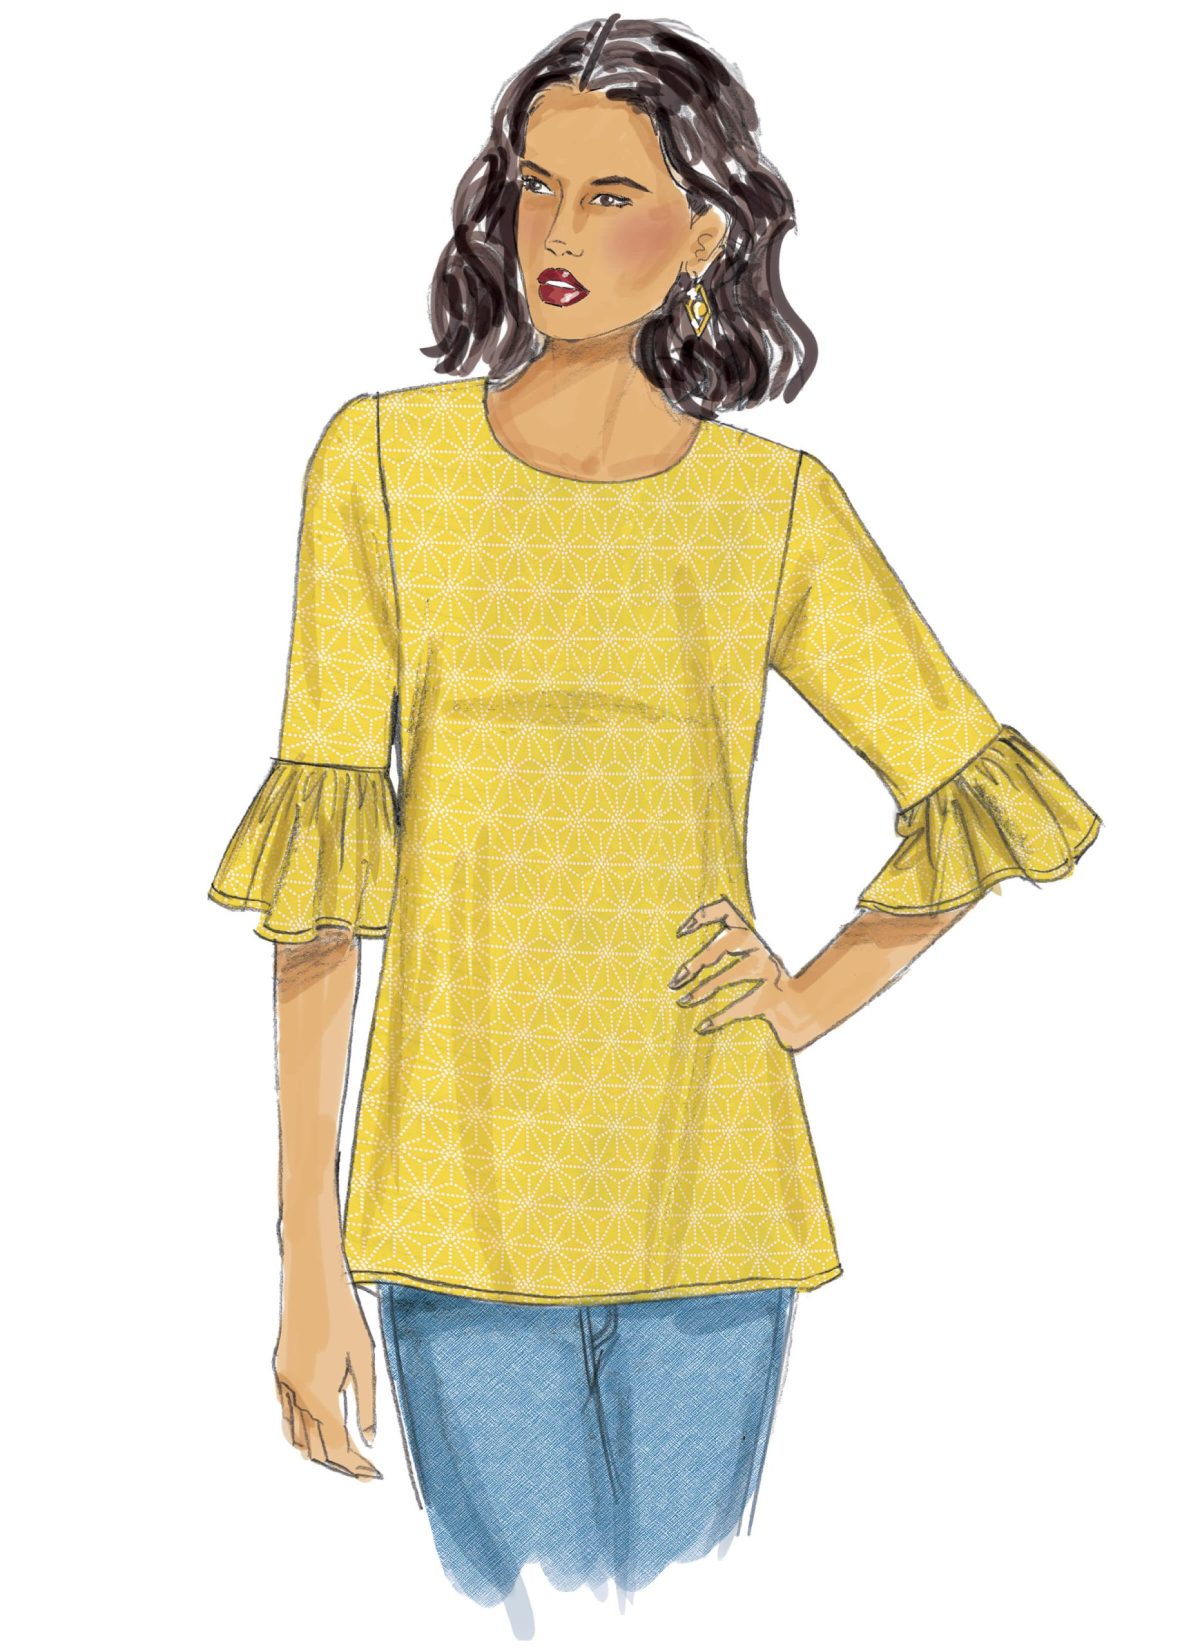 Butterick Sewing Pattern B6456 Misses' Tulip or Ruffle Sleeve Tops